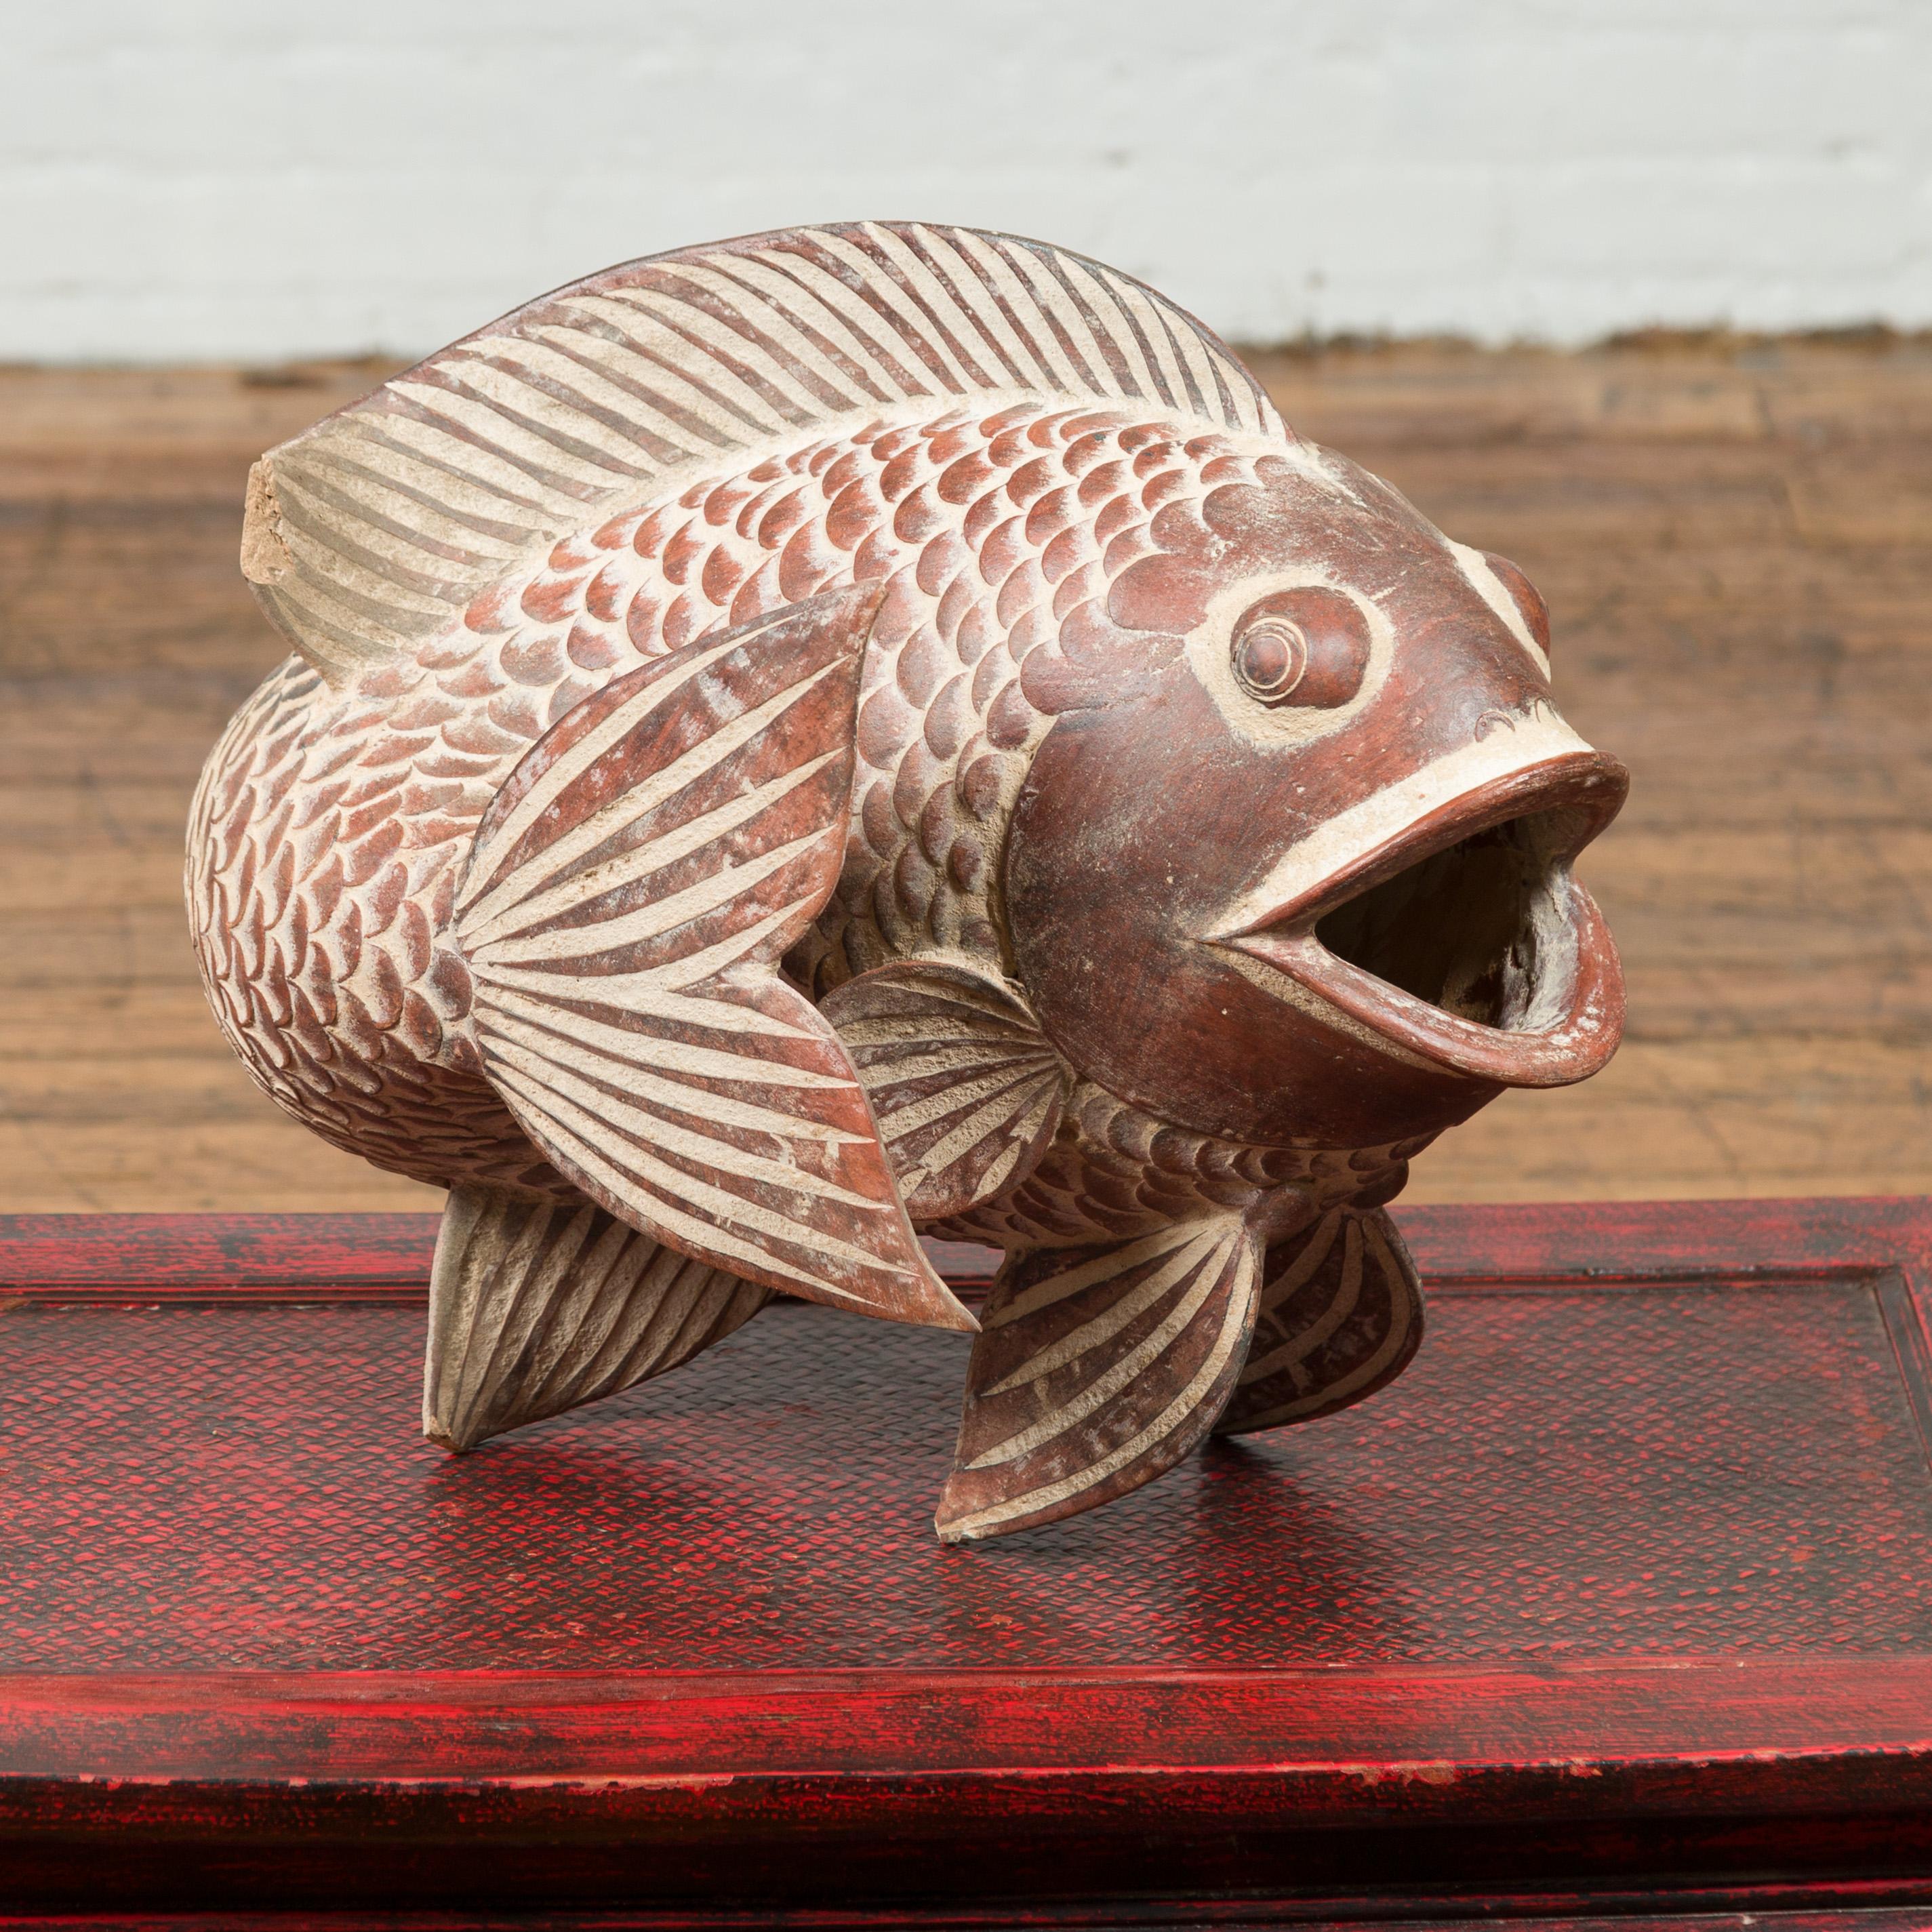 A contemporary Thai terracotta fish sculpture with brown accents and nice detailing. Crafted in Thailand, this contemporary terracotta fish will make for a charming garden ornament. Its tail fin showing a graceful forward movement, the fish opens